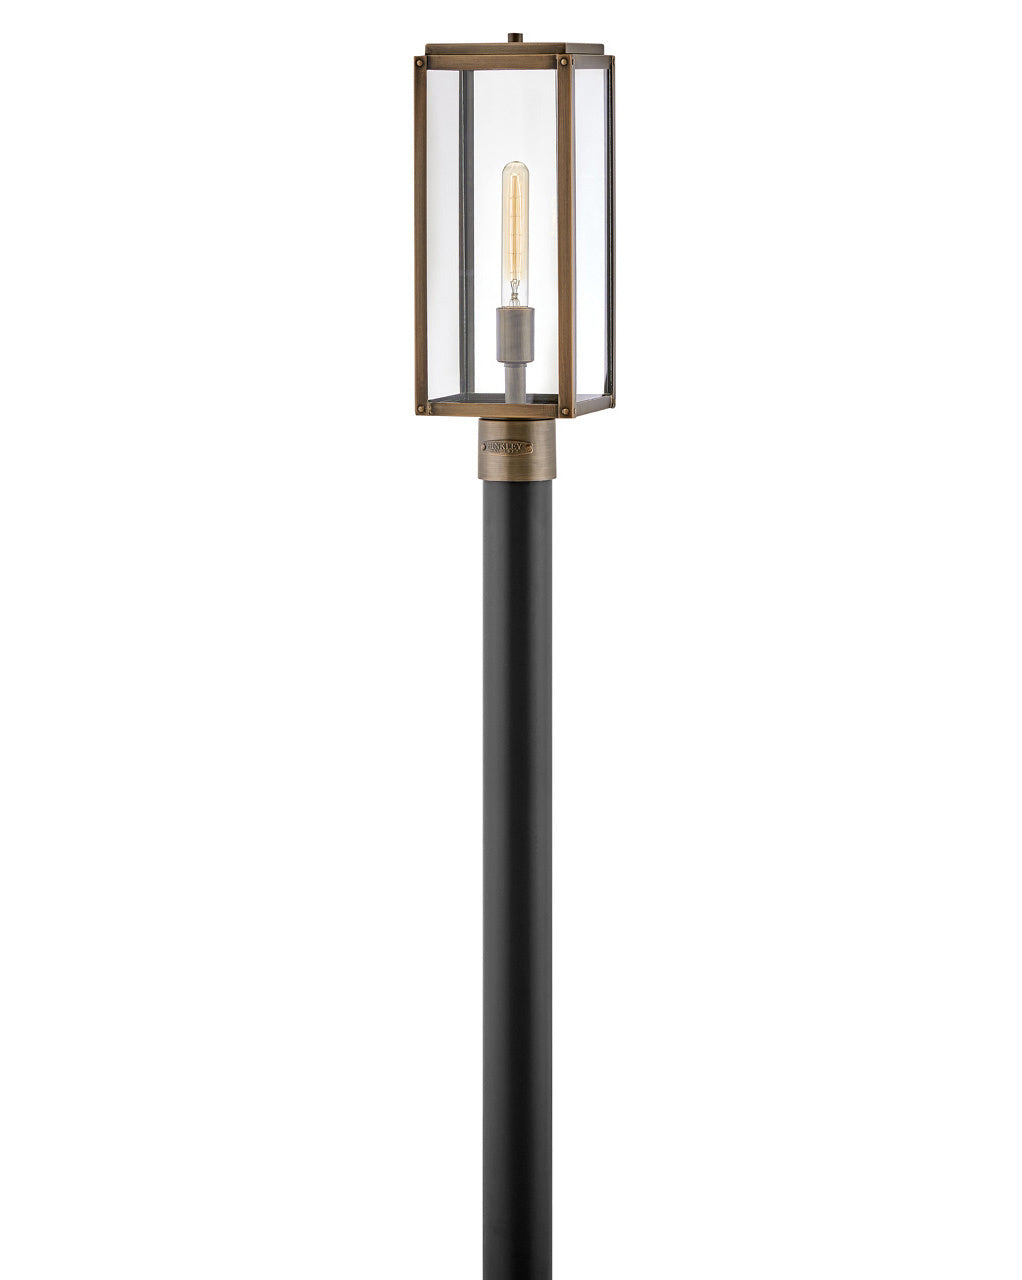 Hinkley Canada - LED Post Top or Pier Mount - Max - Burnished Bronze- Union Lighting Luminaires Decor